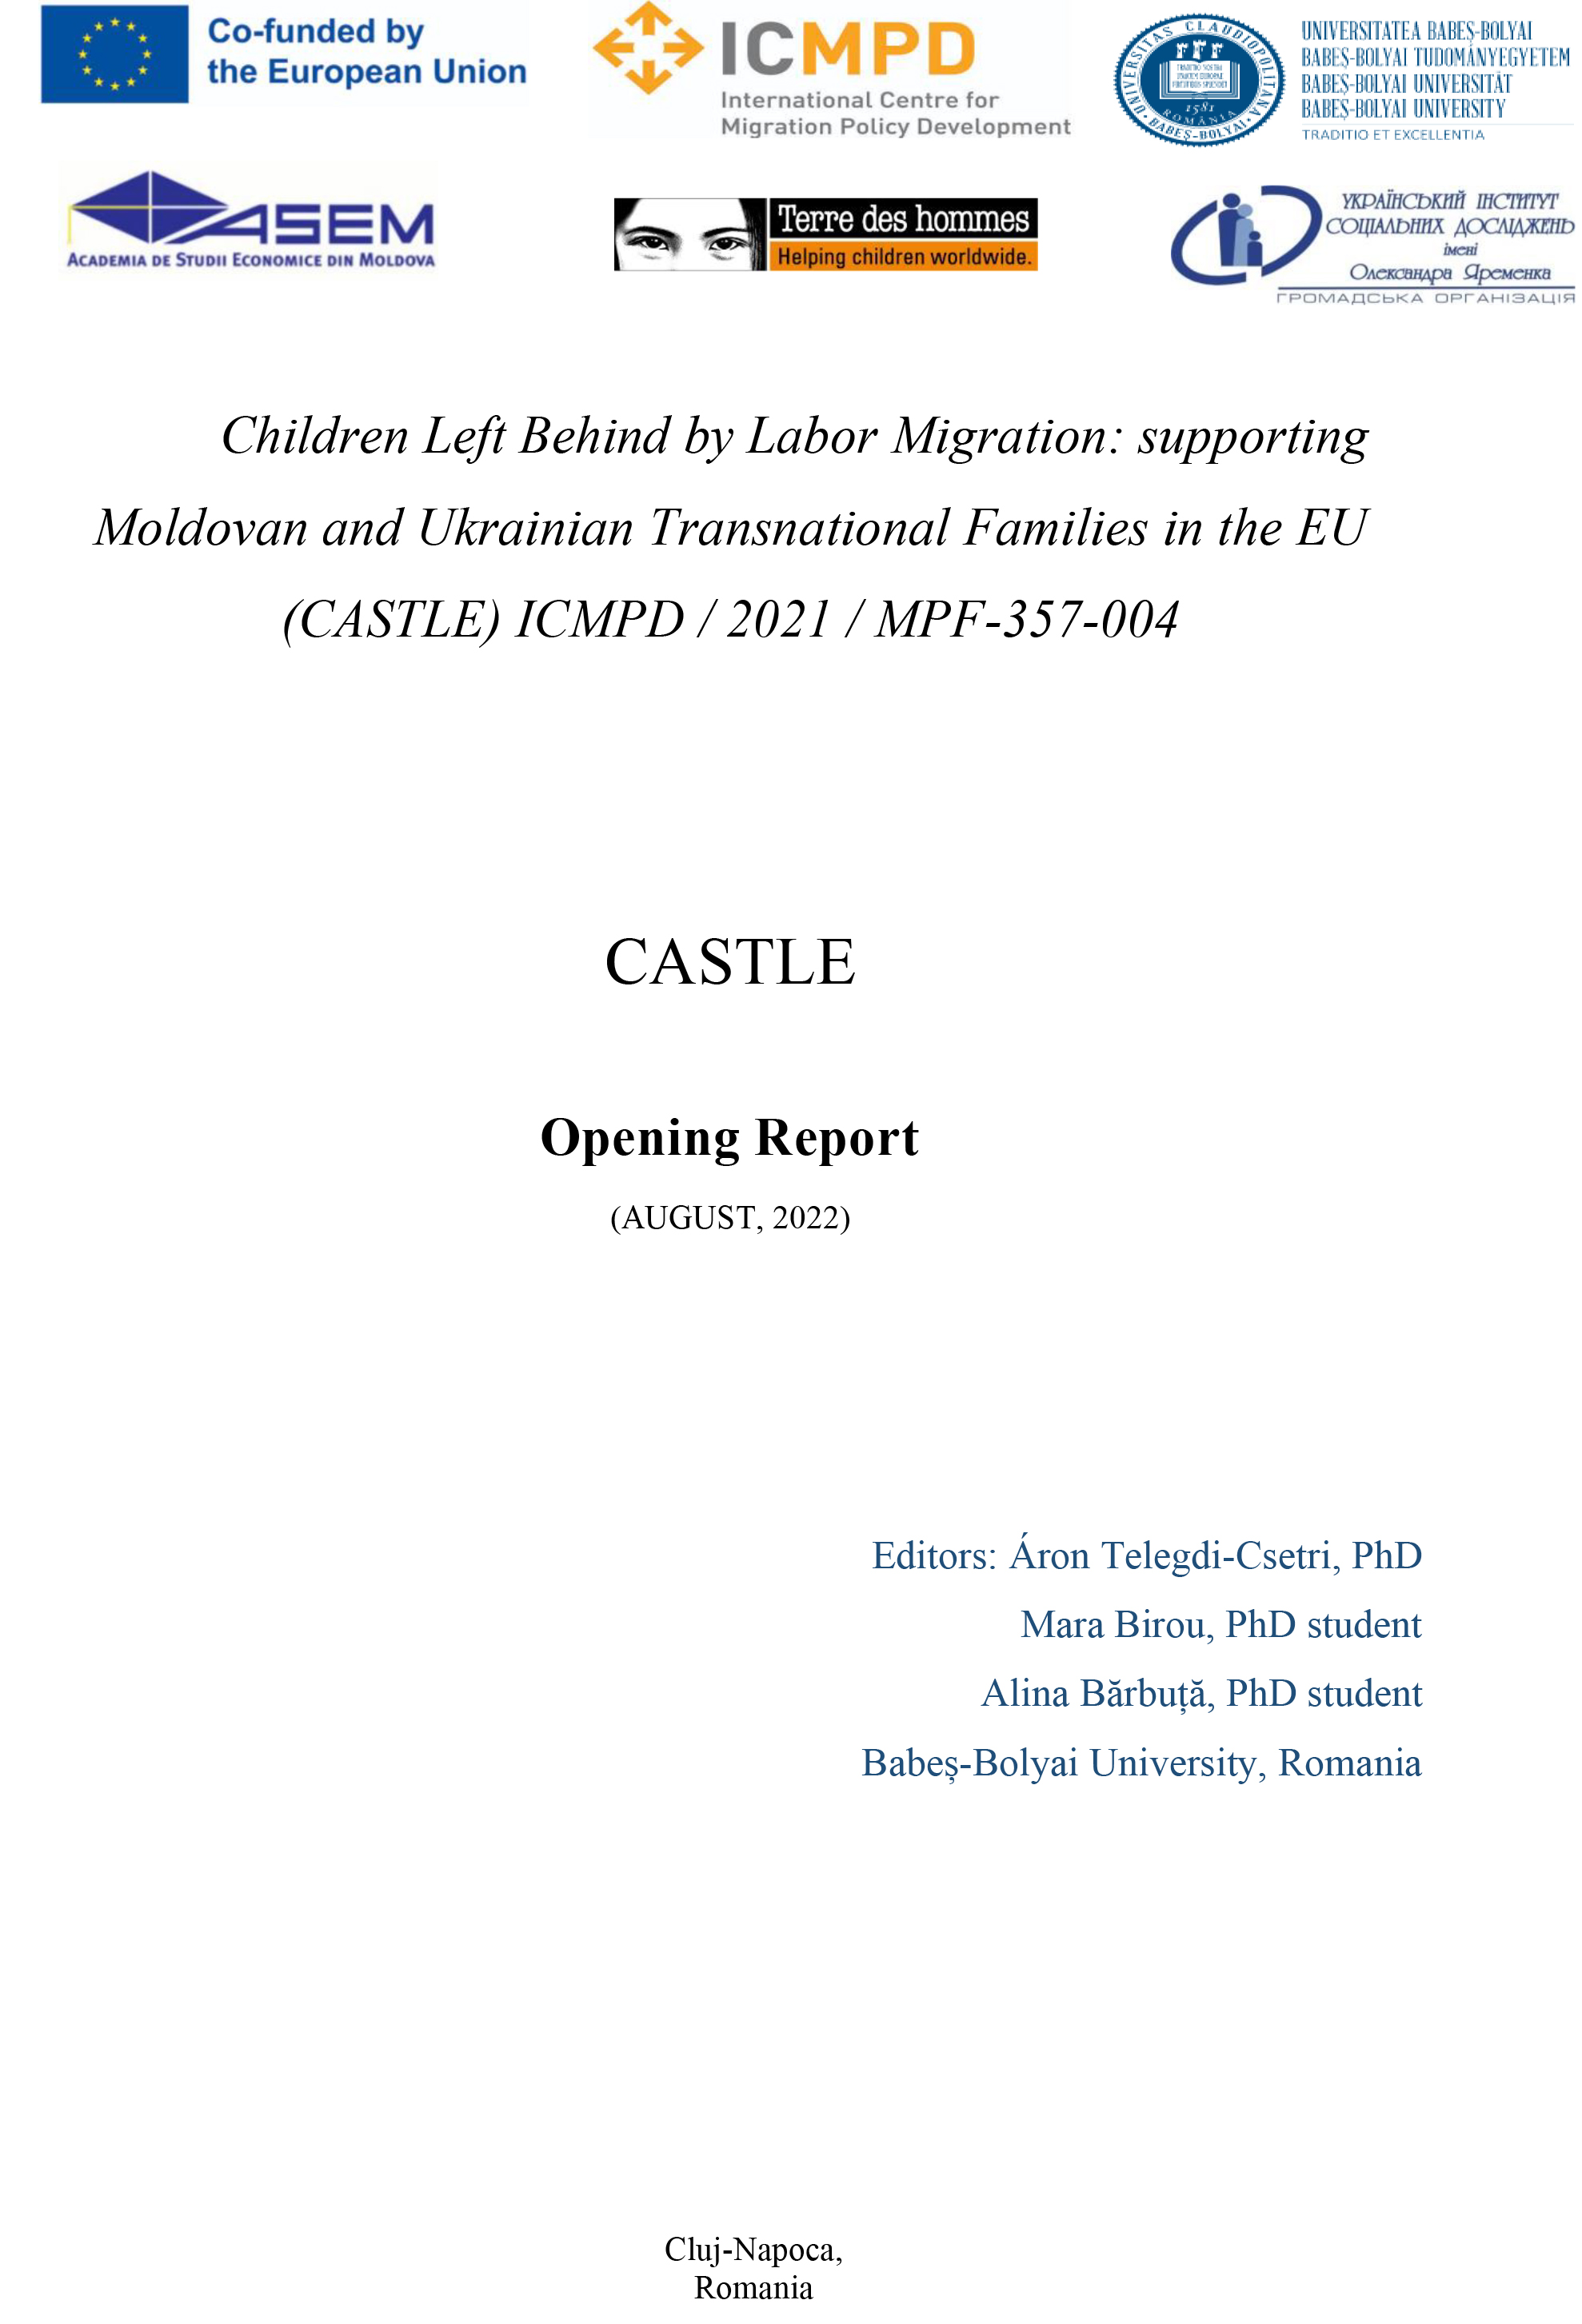 Children Left Behind by Labor Migration: supporting Moldovan and Ukrainian Transnational Families in the EU (CASTLE) ICMPD / 2021 / MPF-357-004